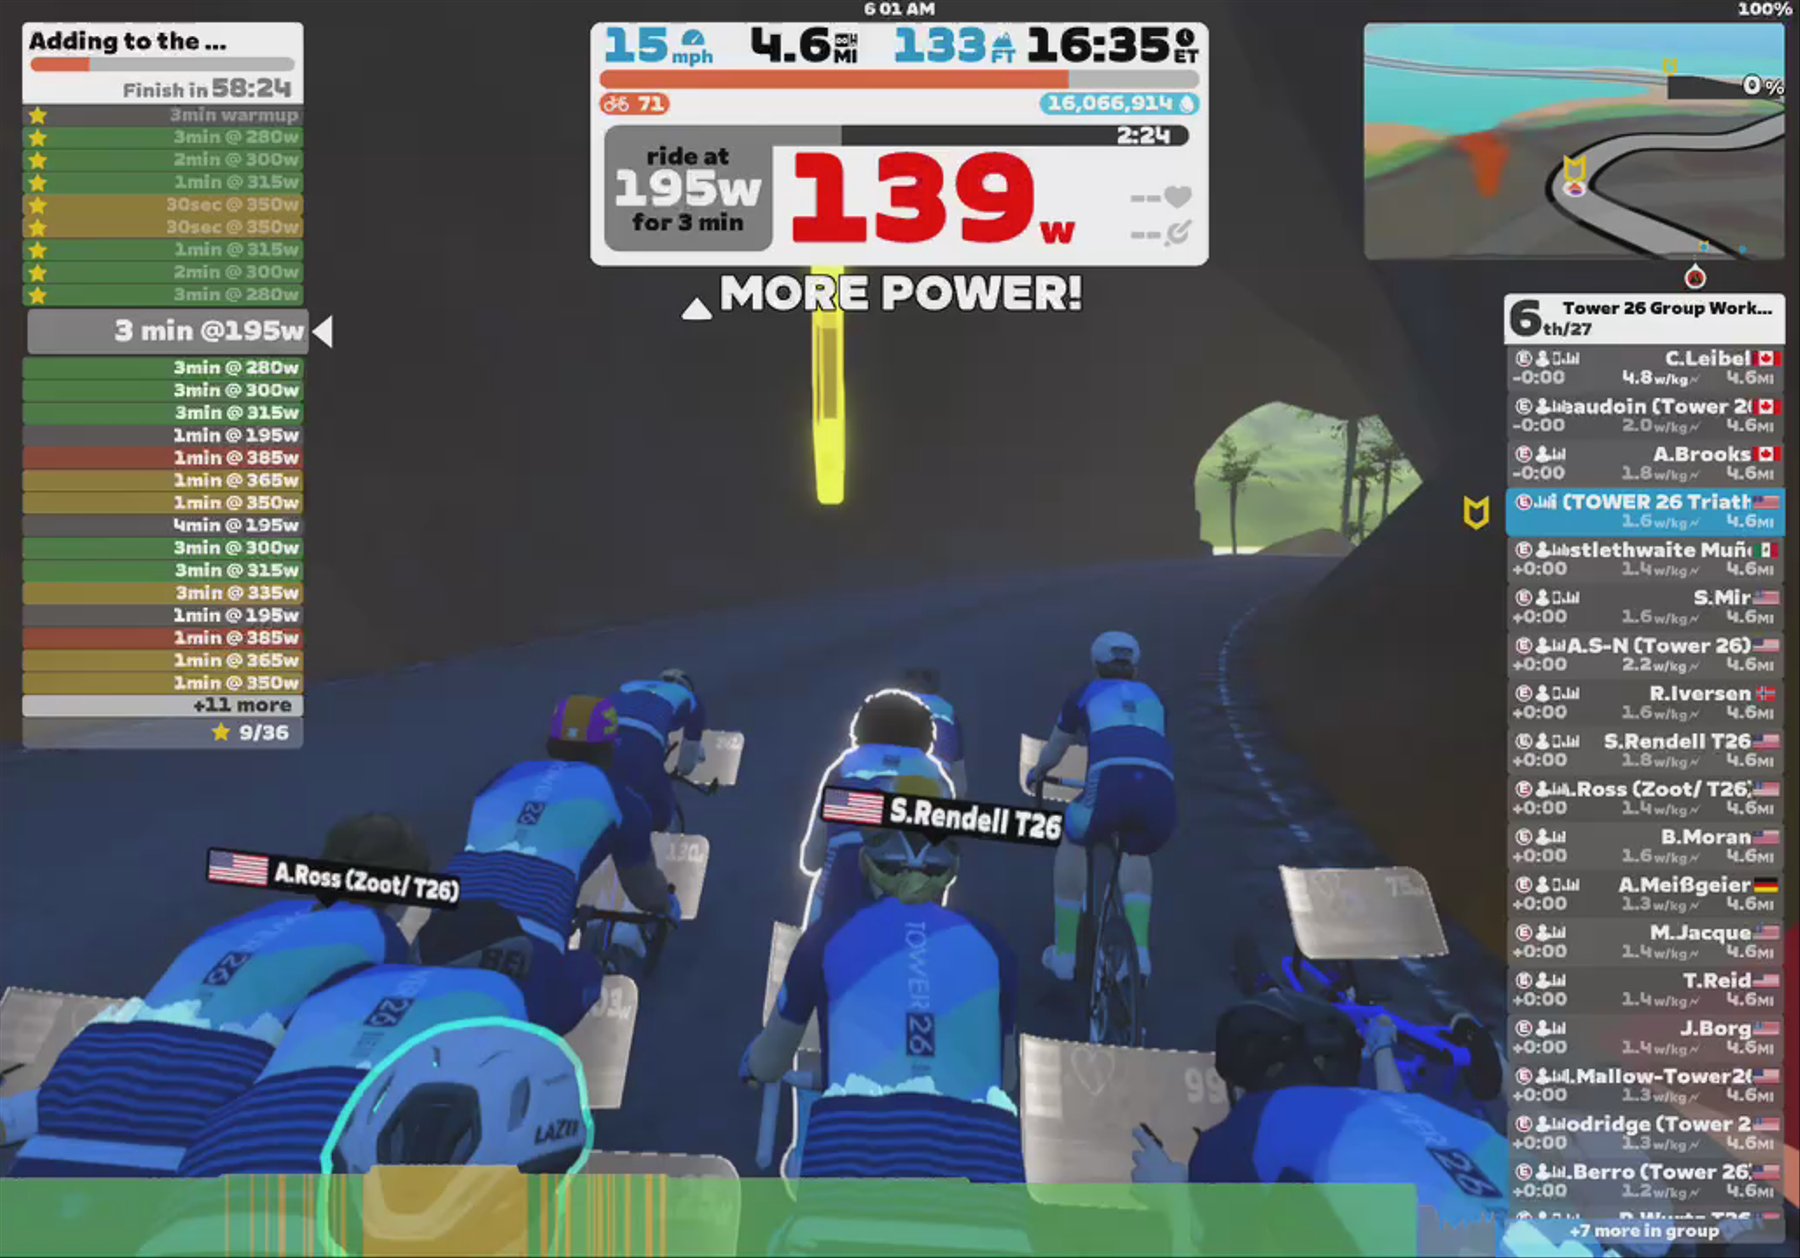 Zwift - Group Workout: Tower 26 Group Workout (E) on Volcano Circuit in Watopia